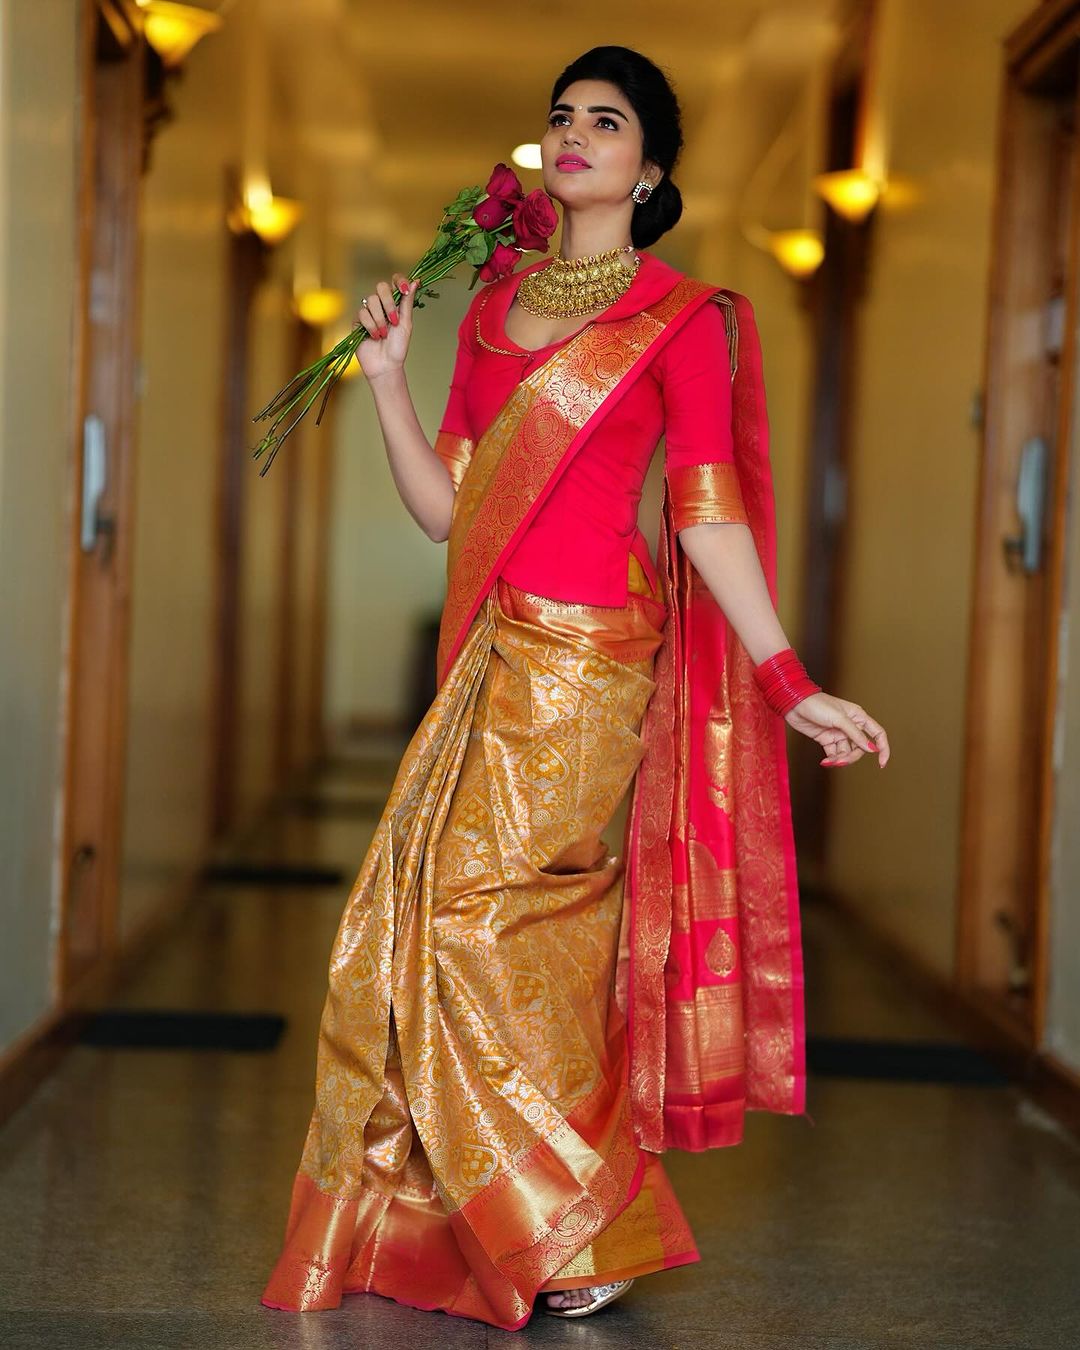 Television presenter varsha traditional attire-Anchor Varsha, Presentervarsha, Varsha Photos,Spicy Hot Pics,Images,High Resolution WallPapers Download